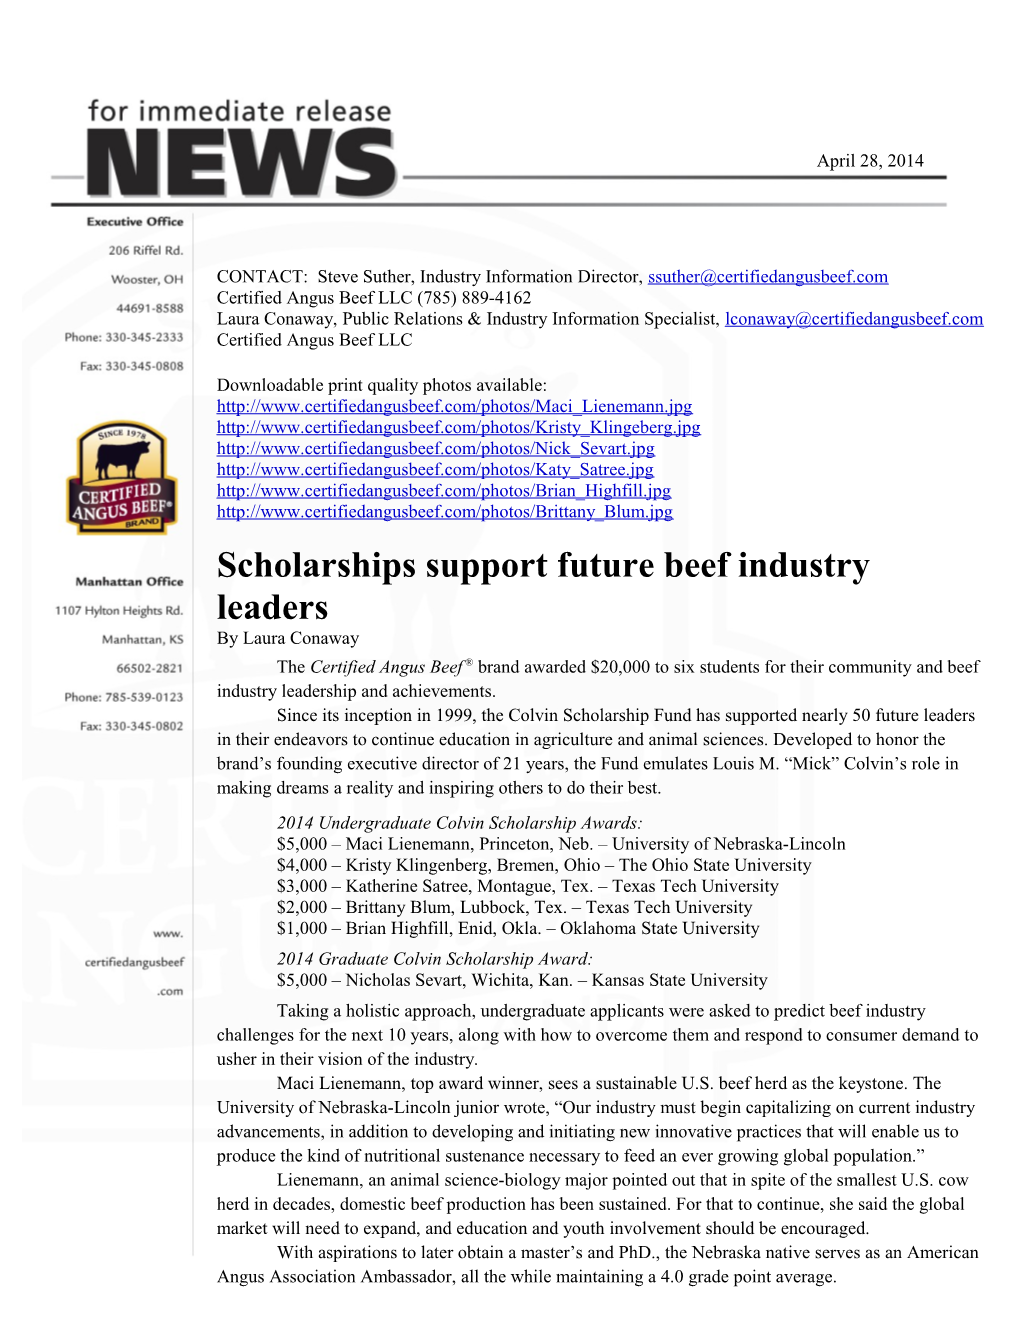 Scholarships Support Future Beef Industry Leaders